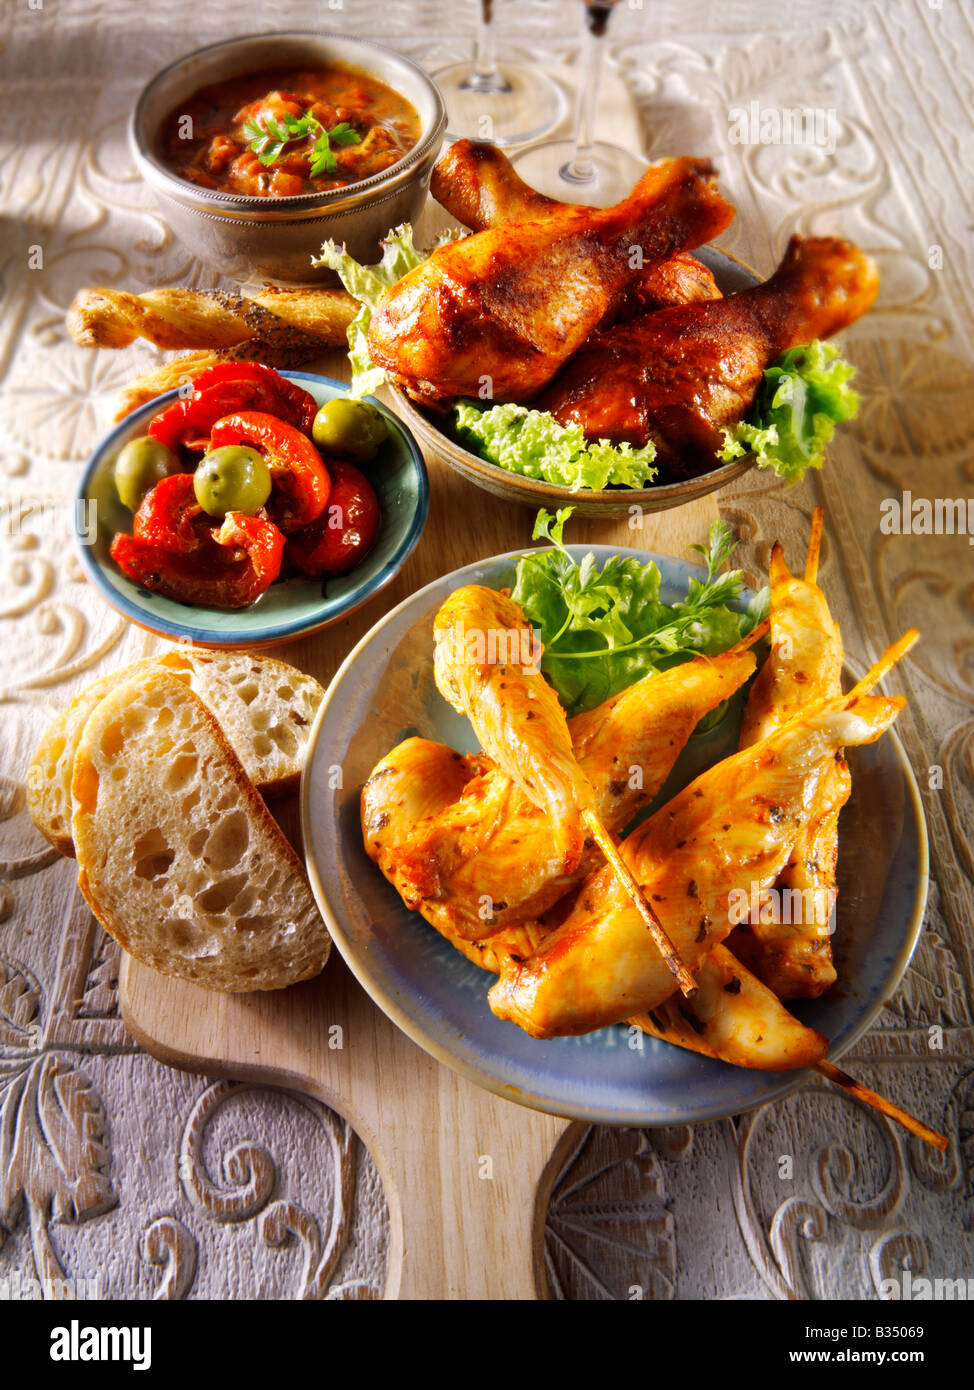 party food - From Front - Marinated chicken skewers, Marinaded chicken drum sticks and sun blushed tomatoes. Stock Photo